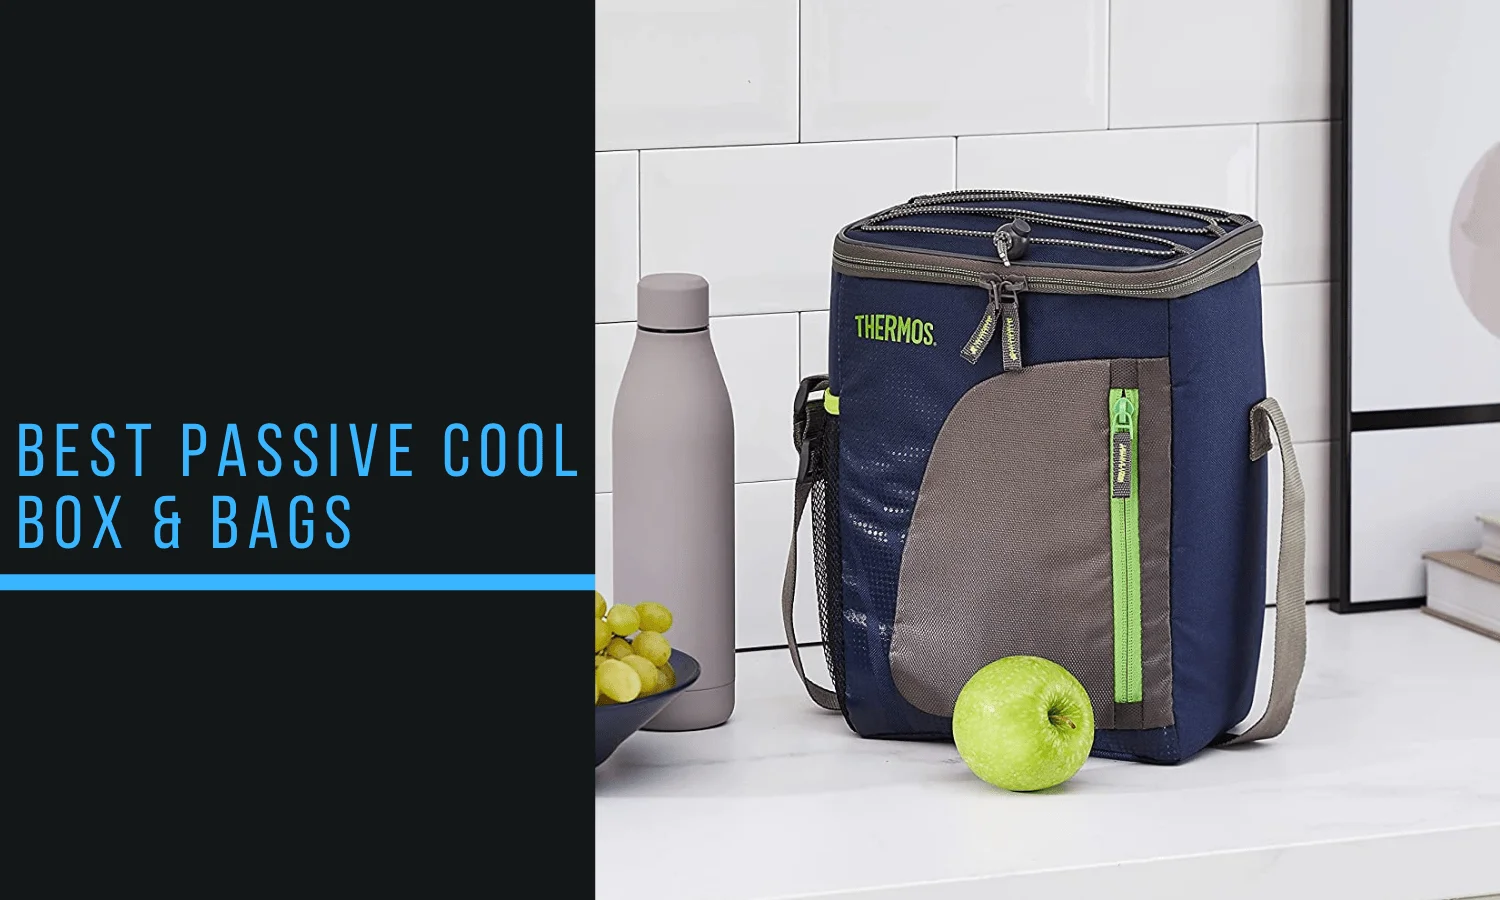 Best Passive Cool Box & Bags for Summer 2022 – Ideal for Beer, Picnics & Festivals